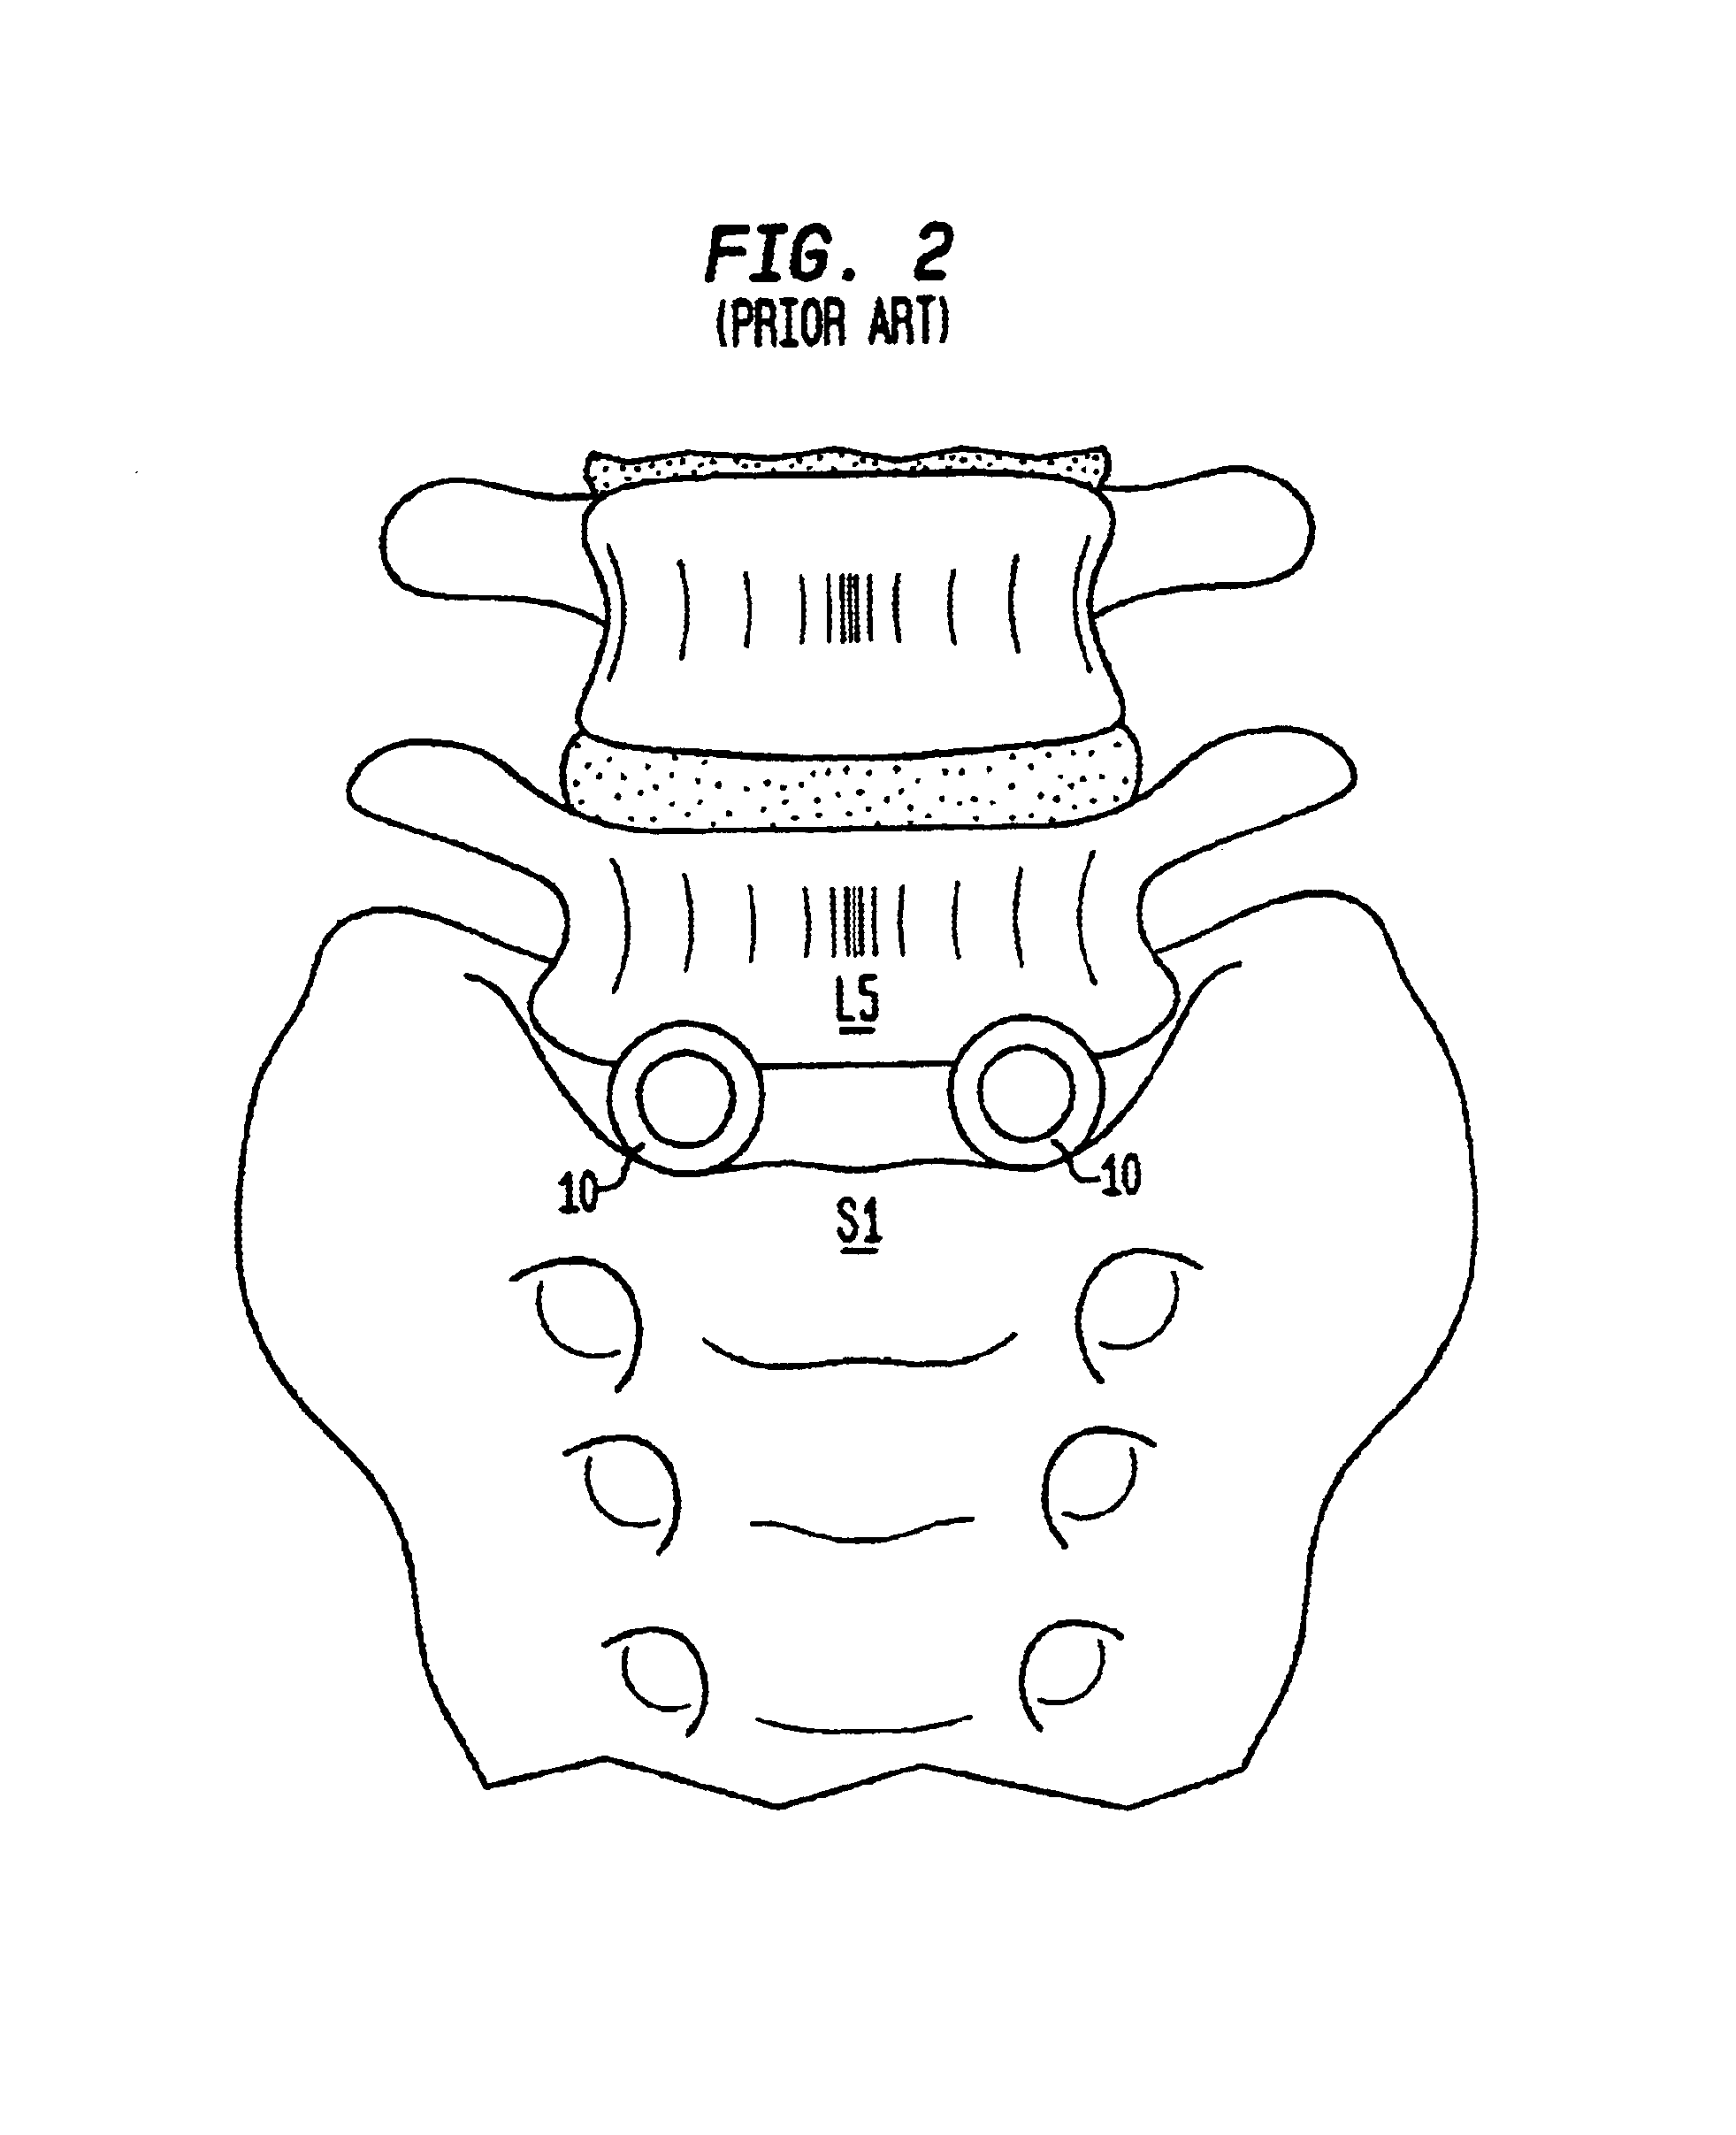 Intervertebral spacer device having a domed arch shaped spring